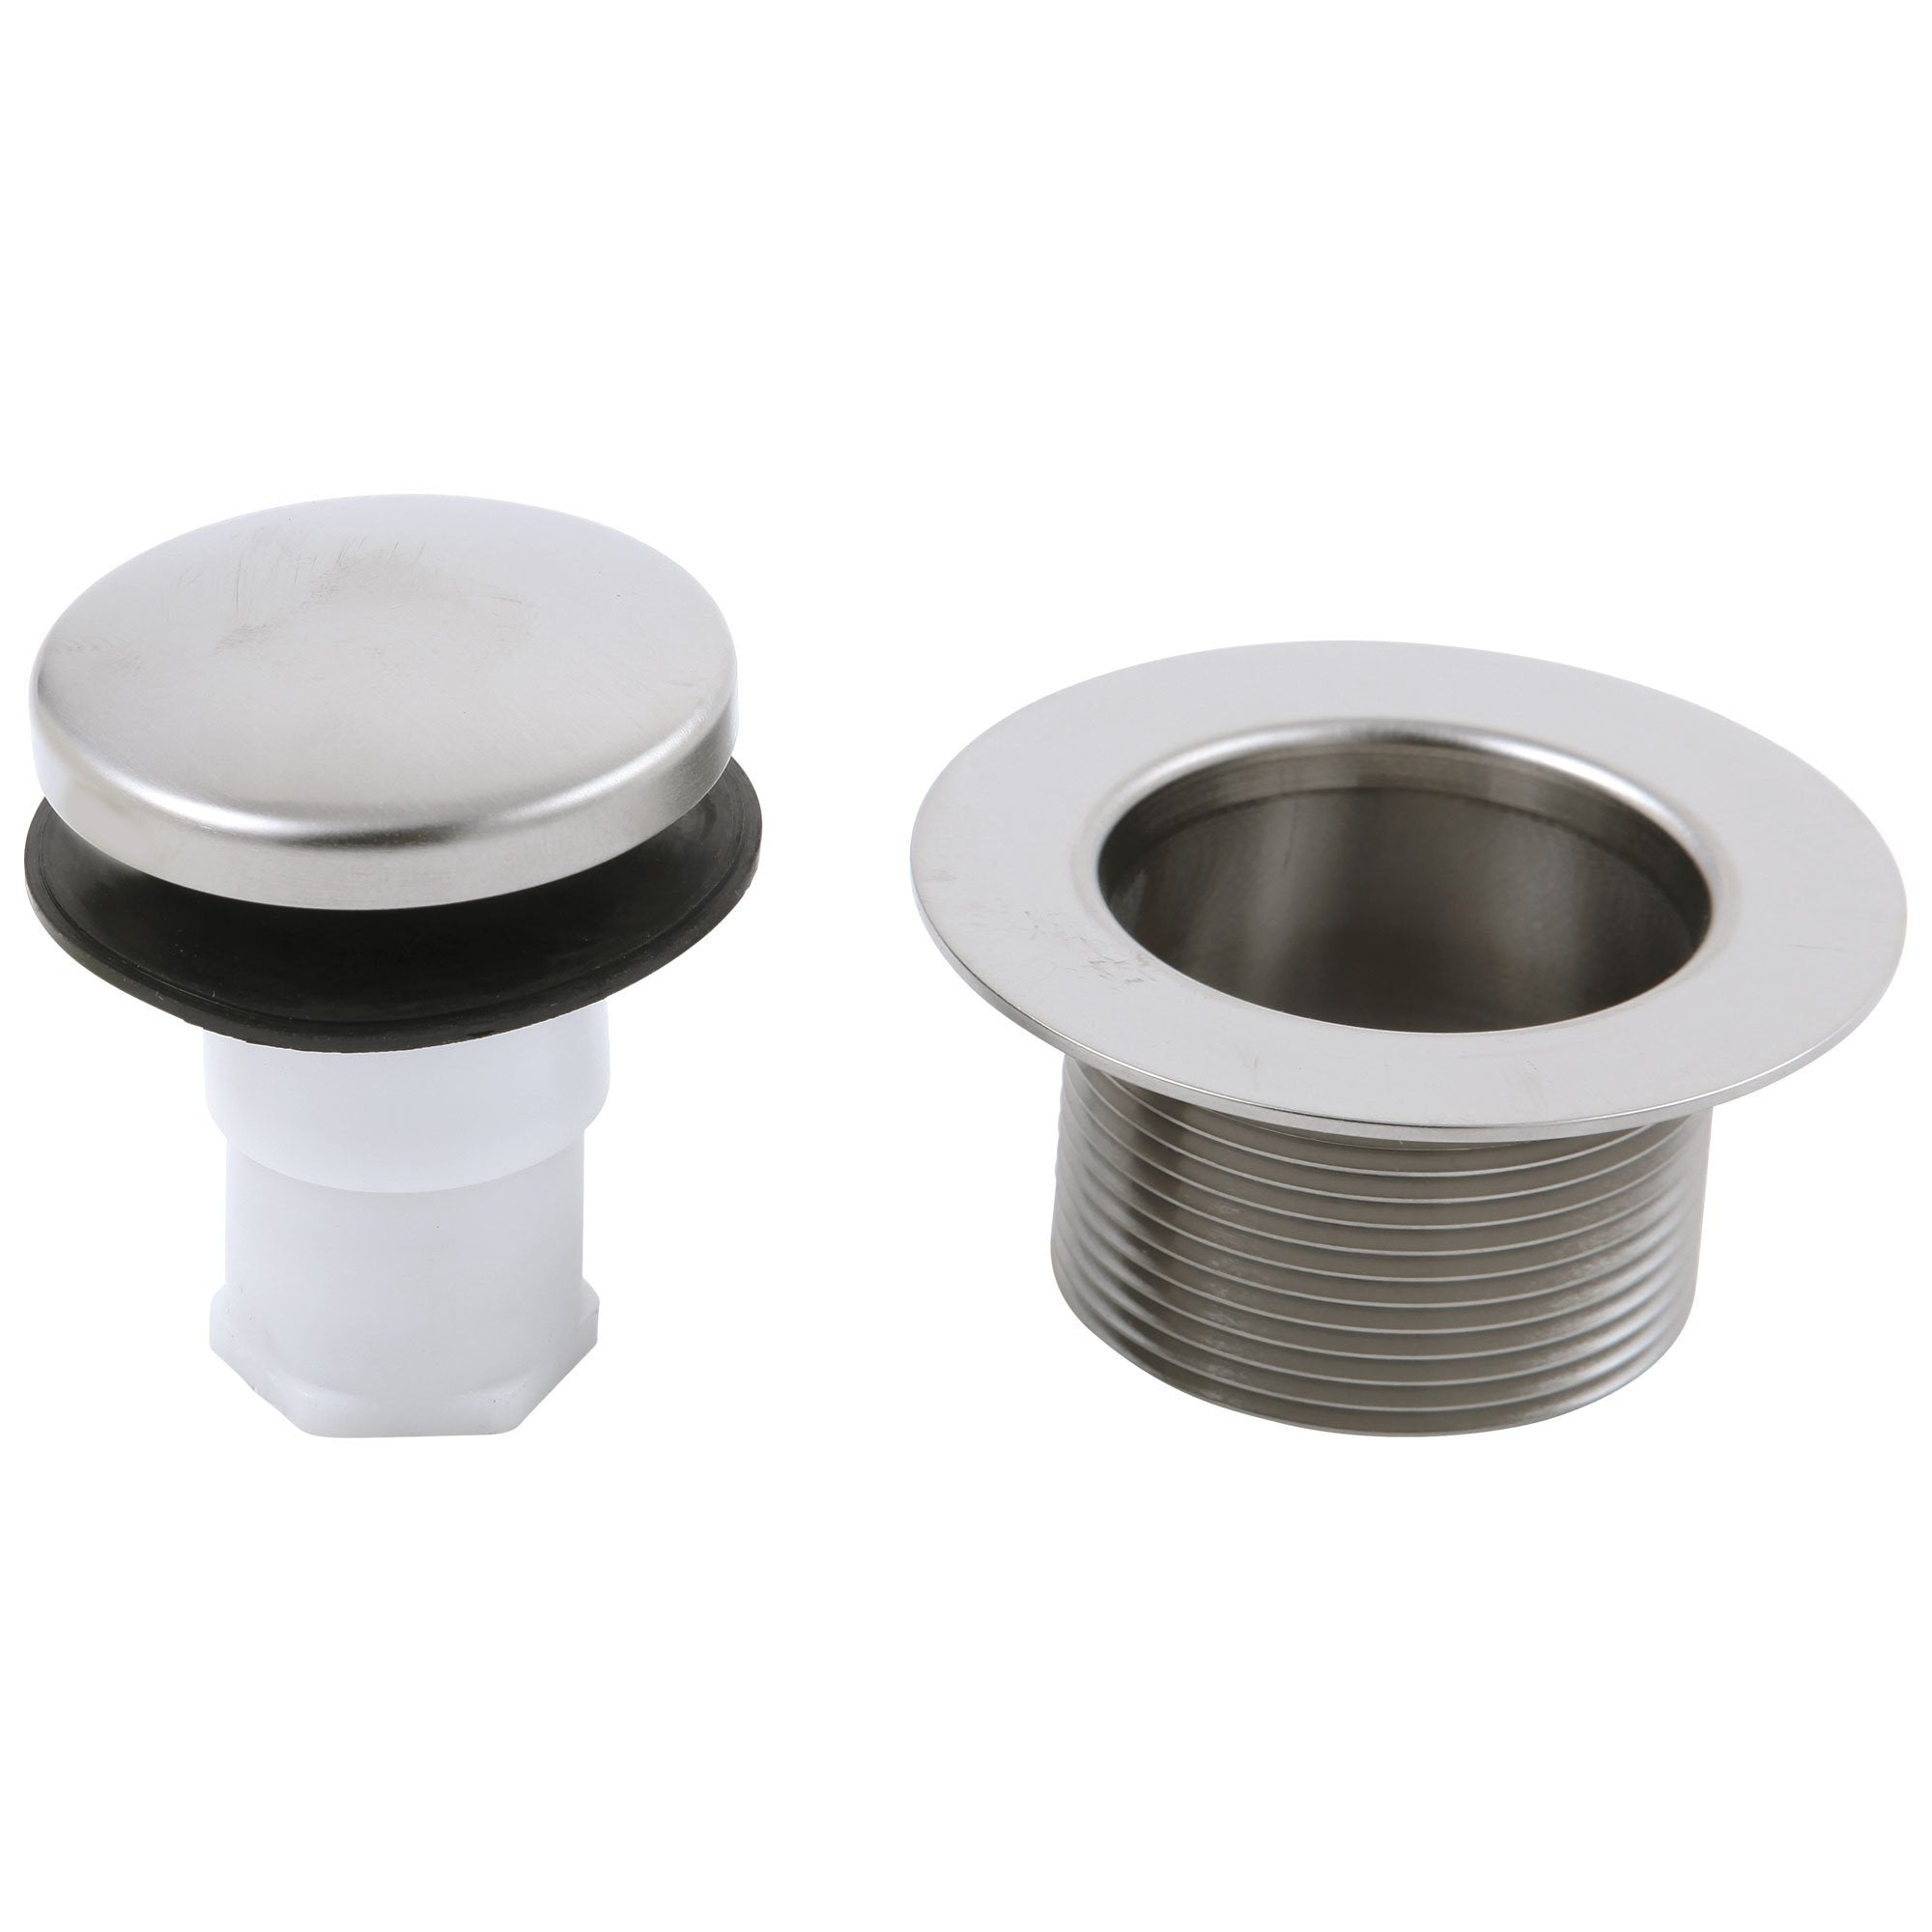 Delta Stainless Steel Finish Touch Toe Operated Stopper and Waste Plug Tub Drain 472311